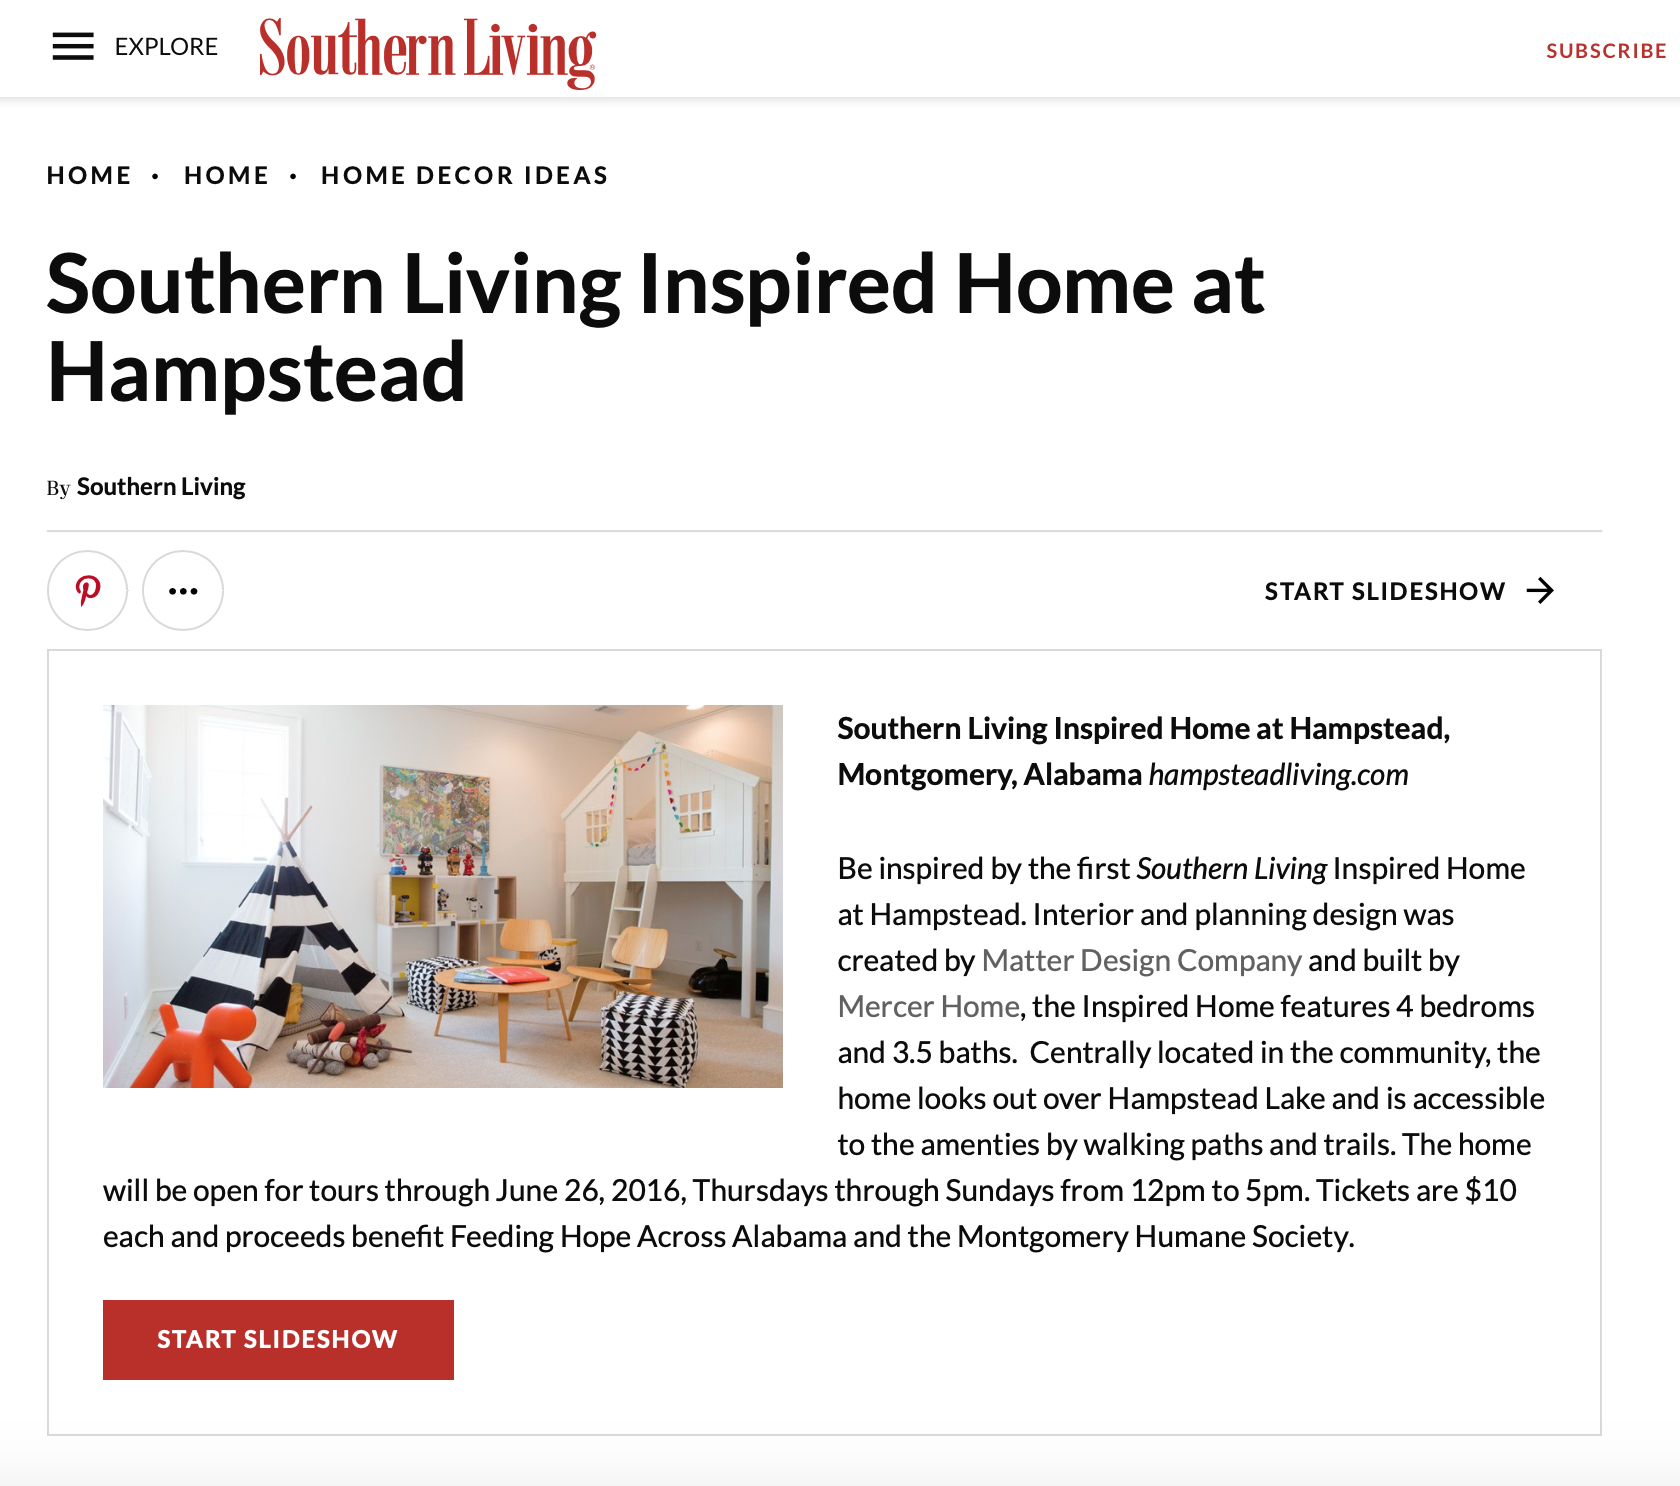 Southern Living: Hampstead Inspired Home